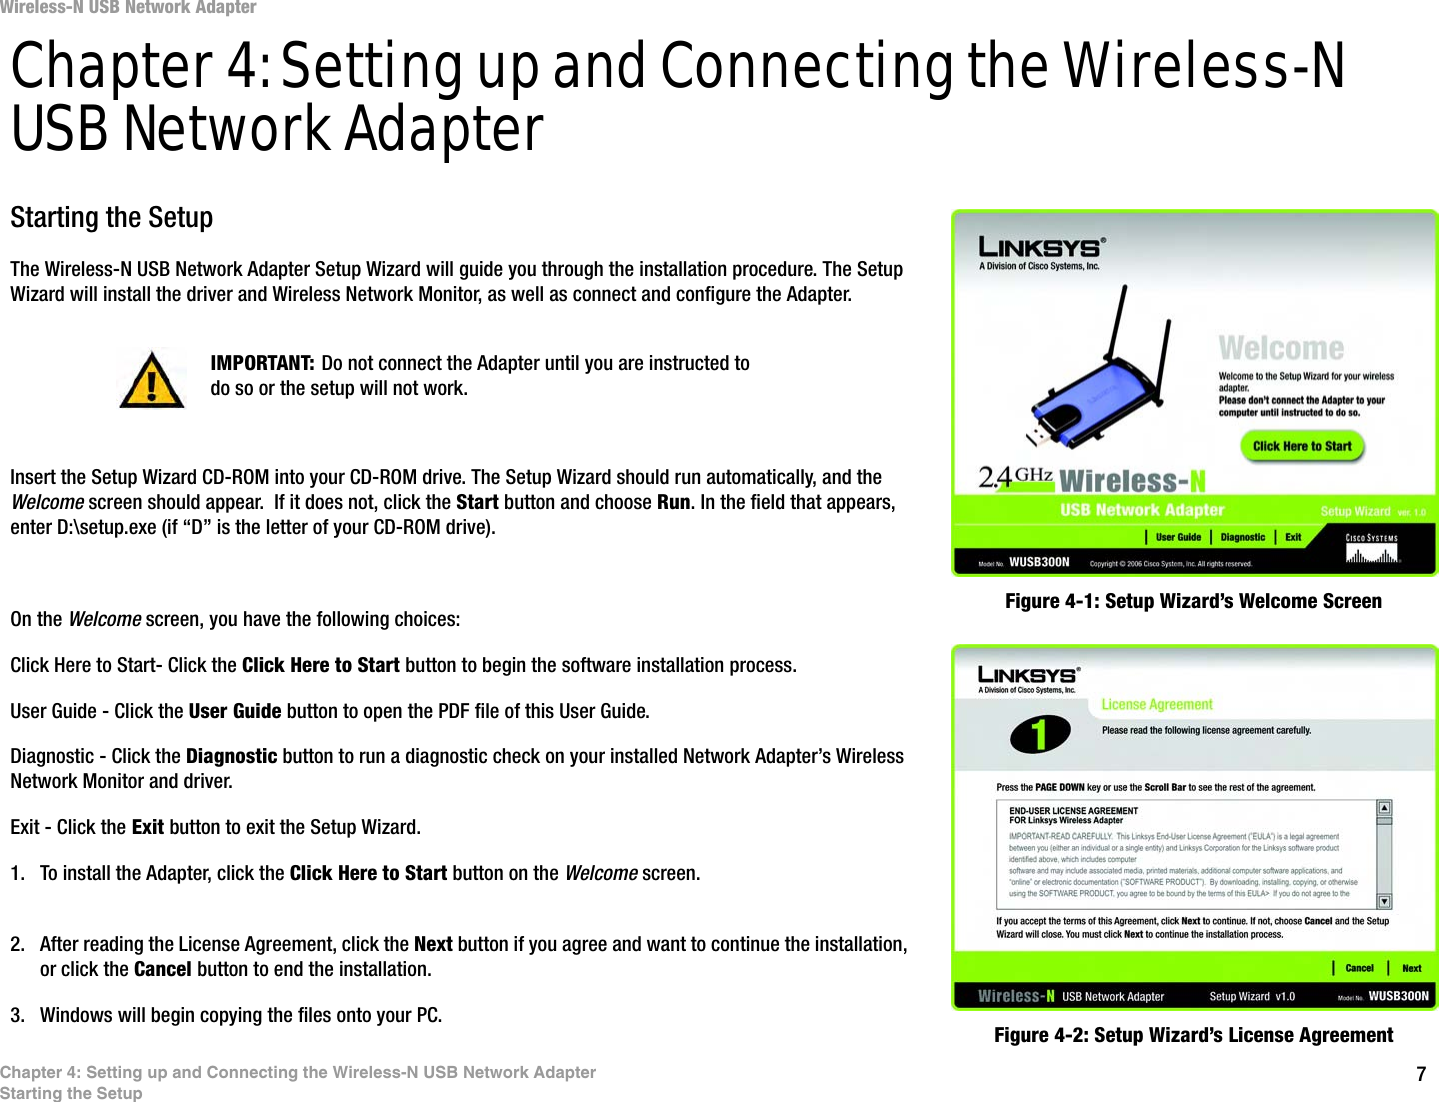 7Chapter 4: Setting up and Connecting the Wireless-N USB Network AdapterStarting the SetupWireless-N USB Network AdapterChapter 4: Setting up and Connecting the Wireless-N USB Network AdapterStarting the SetupThe Wireless-N USB Network Adapter Setup Wizard will guide you through the installation procedure. The Setup Wizard will install the driver and Wireless Network Monitor, as well as connect and configure the Adapter.Insert the Setup Wizard CD-ROM into your CD-ROM drive. The Setup Wizard should run automatically, and the Welcome screen should appear.  If it does not, click the Start button and choose Run. In the field that appears, enter D:\setup.exe (if “D” is the letter of your CD-ROM drive). On the Welcome screen, you have the following choices:Click Here to Start- Click the Click Here to Start button to begin the software installation process. User Guide - Click the User Guide button to open the PDF file of this User Guide. Diagnostic - Click the Diagnostic button to run a diagnostic check on your installed Network Adapter’s Wireless Network Monitor and driver.Exit - Click the Exit button to exit the Setup Wizard.1. To install the Adapter, click the Click Here to Start button on the Welcome screen.2. After reading the License Agreement, click the Next button if you agree and want to continue the installation, or click the Cancel button to end the installation.3. Windows will begin copying the files onto your PC. Figure 4-1: Setup Wizard’s Welcome ScreenFigure 4-2: Setup Wizard’s License AgreementIMPORTANT: Do not connect the Adapter until you are instructed to do so or the setup will not work.